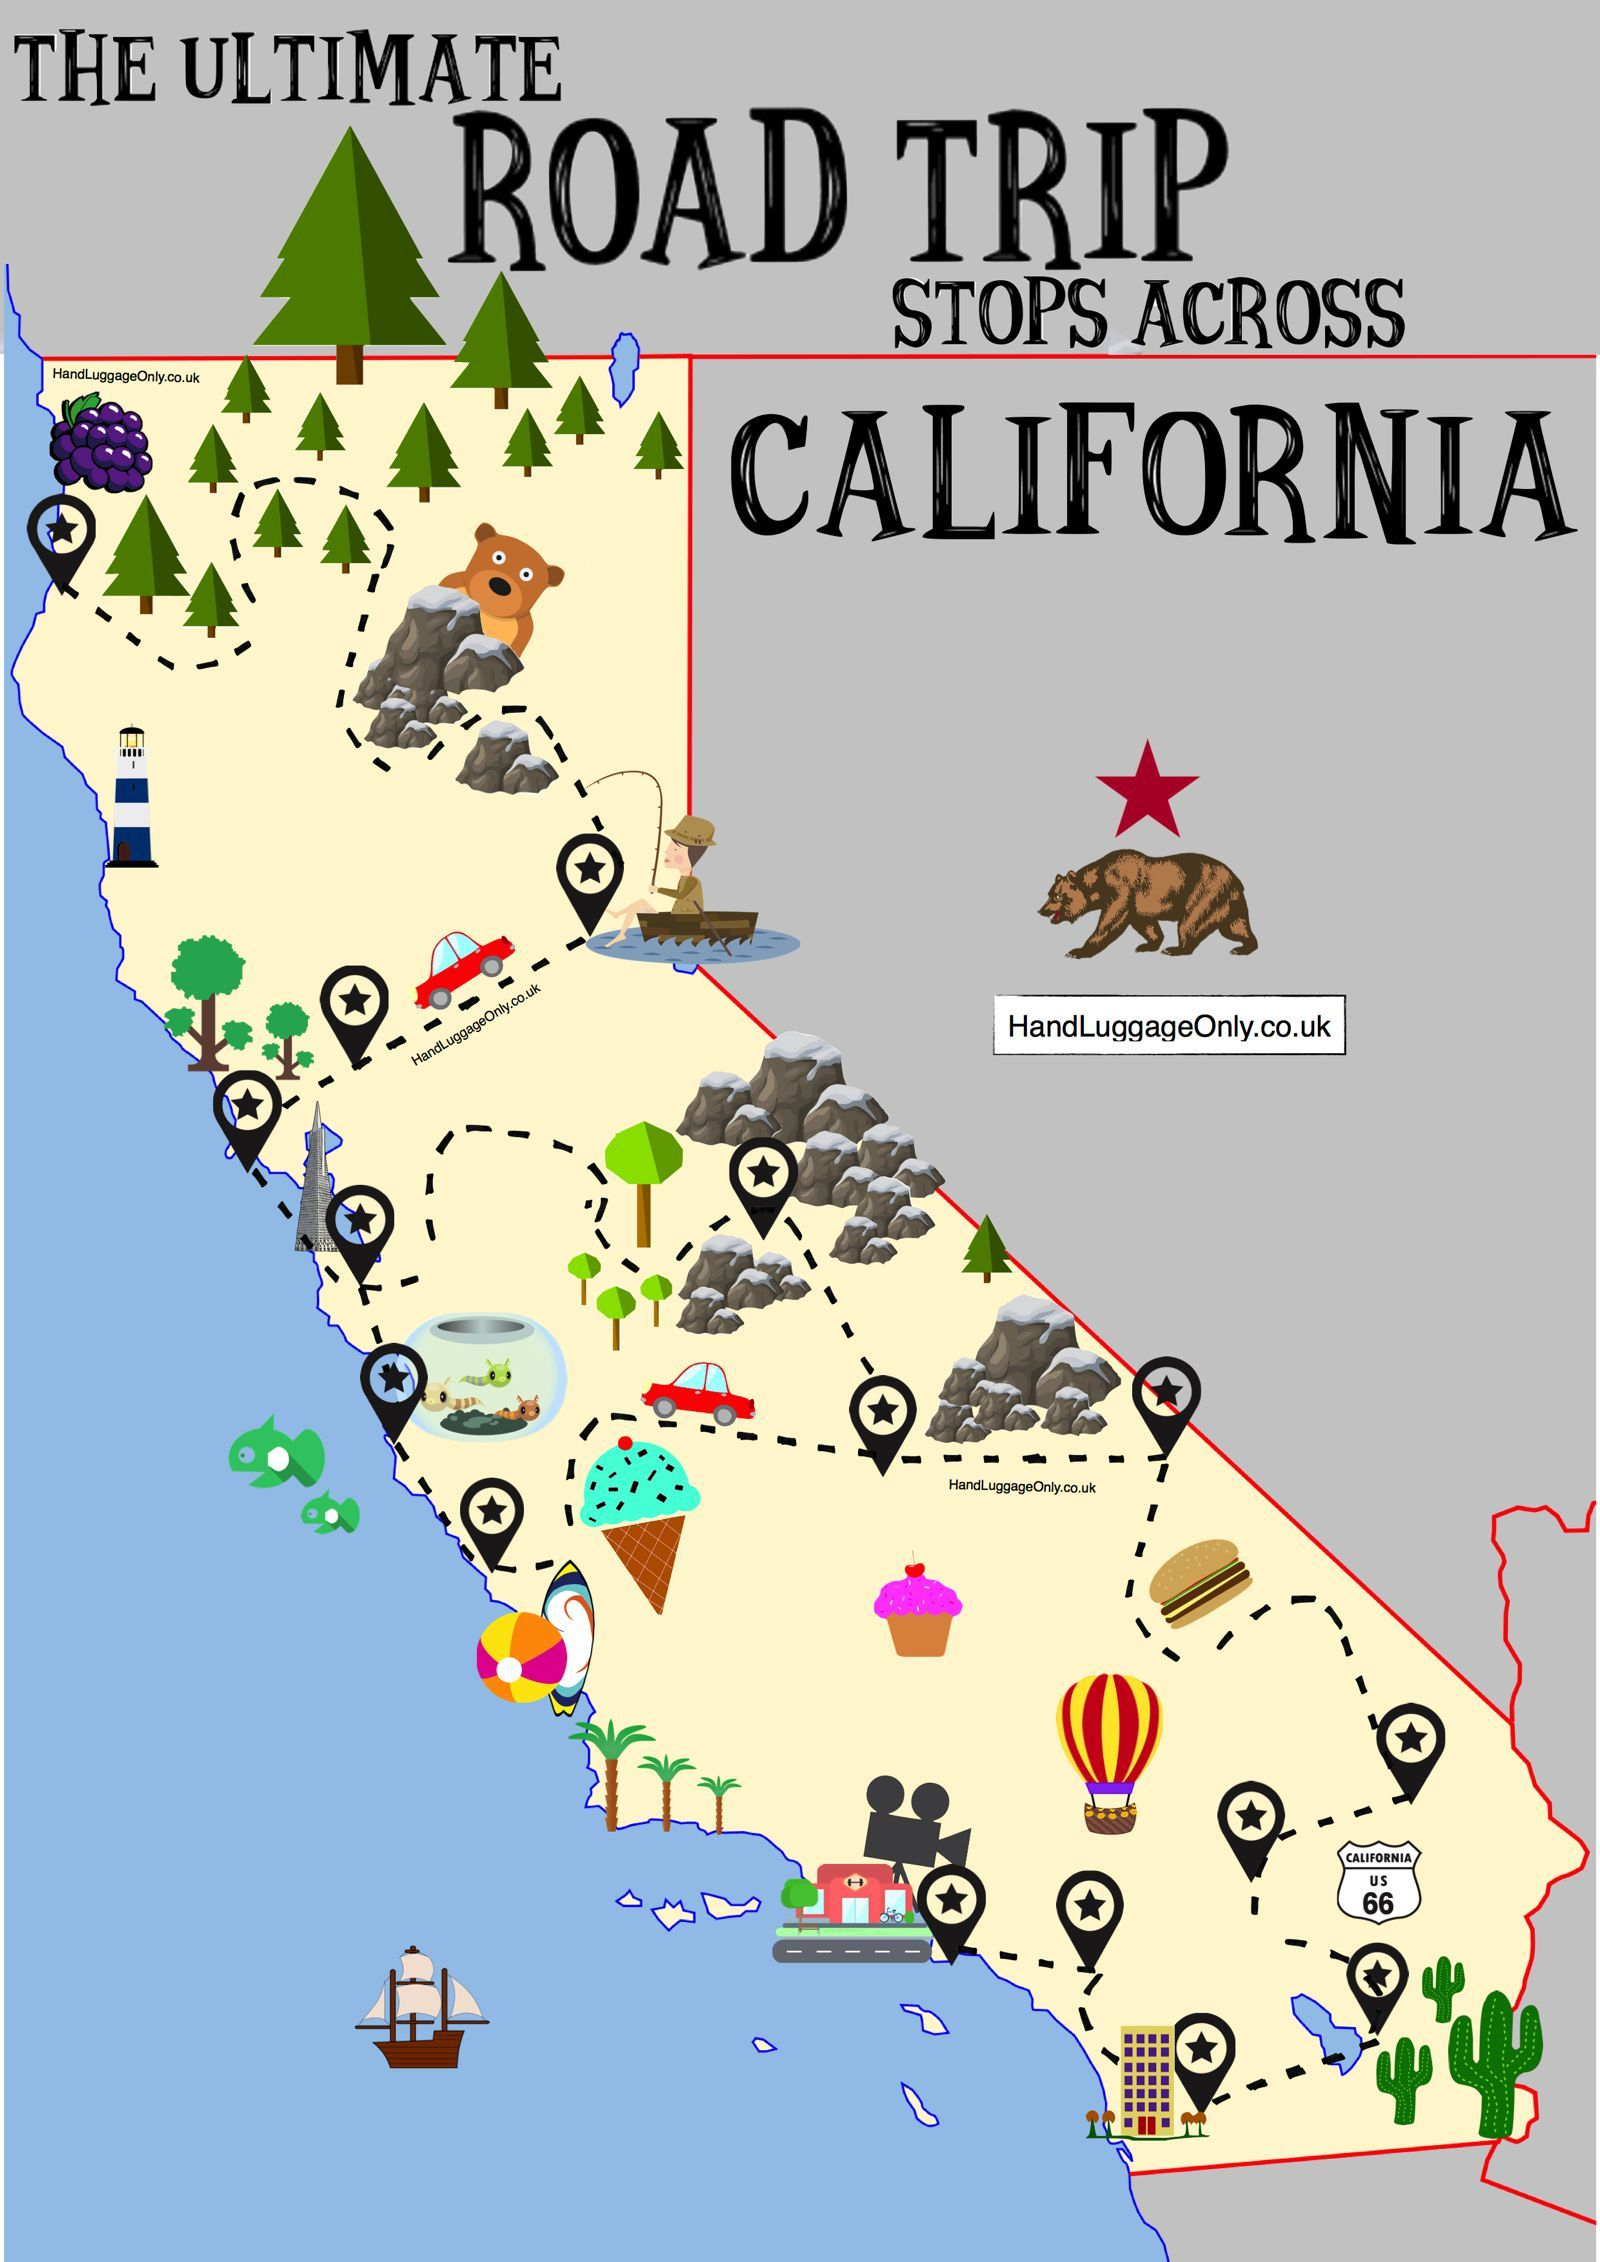 The Ultimate Road Trip Map Of Places To Visit In California | Travel - California Highway 1 Road Trip Map